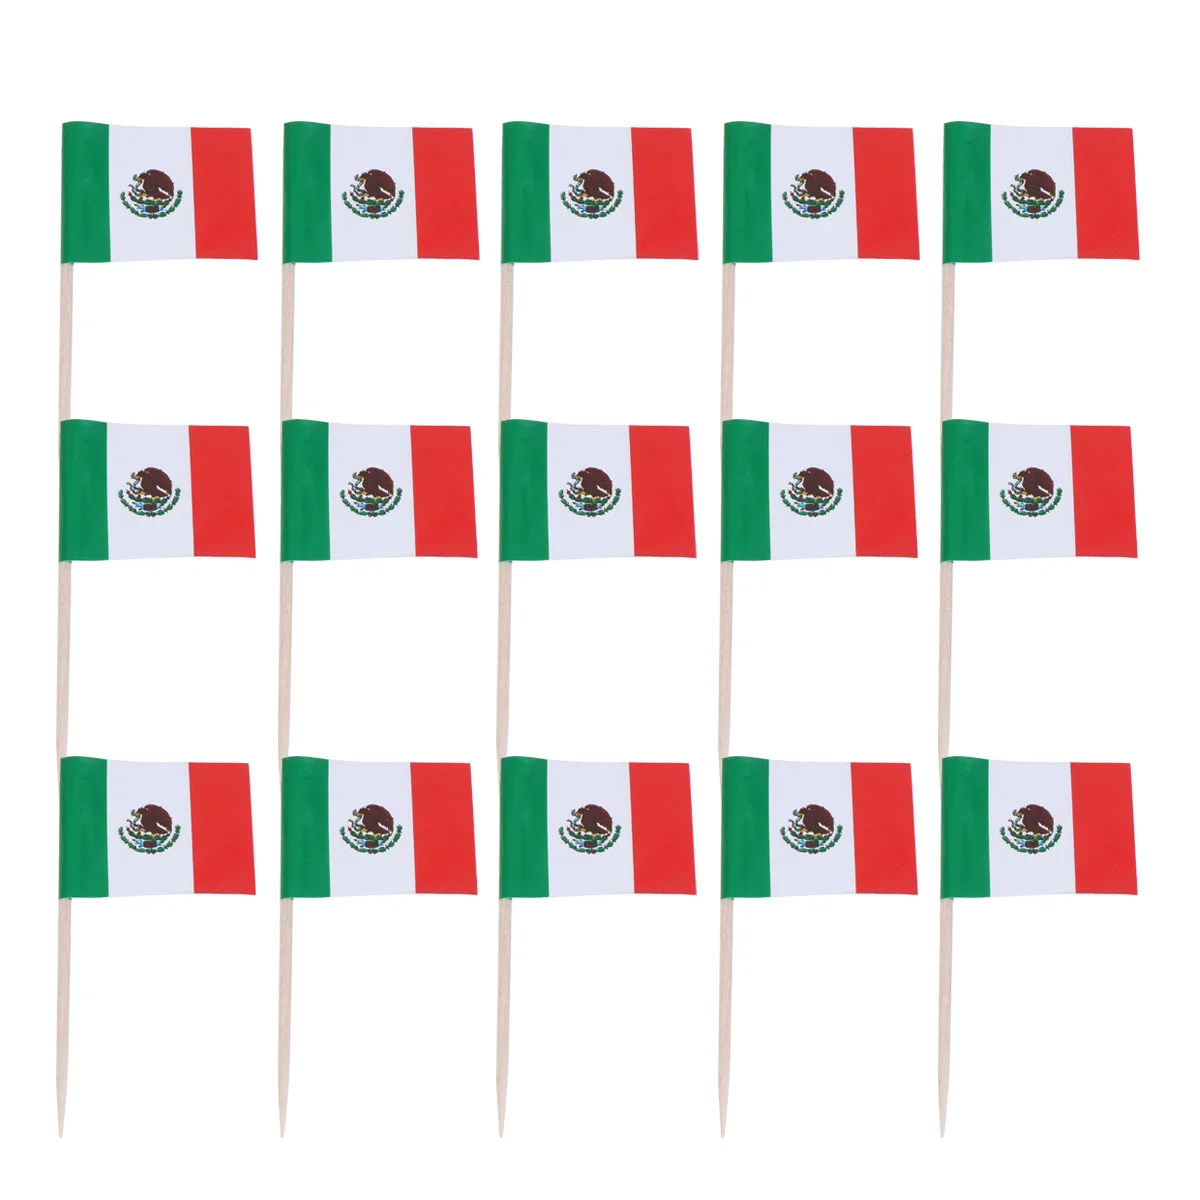 

Flag Flags Mexico Picks Mexican Cupcake Cake Toothpick Toothpicks Toppers Stick Cocktail Mini Decorations Topper World Pick